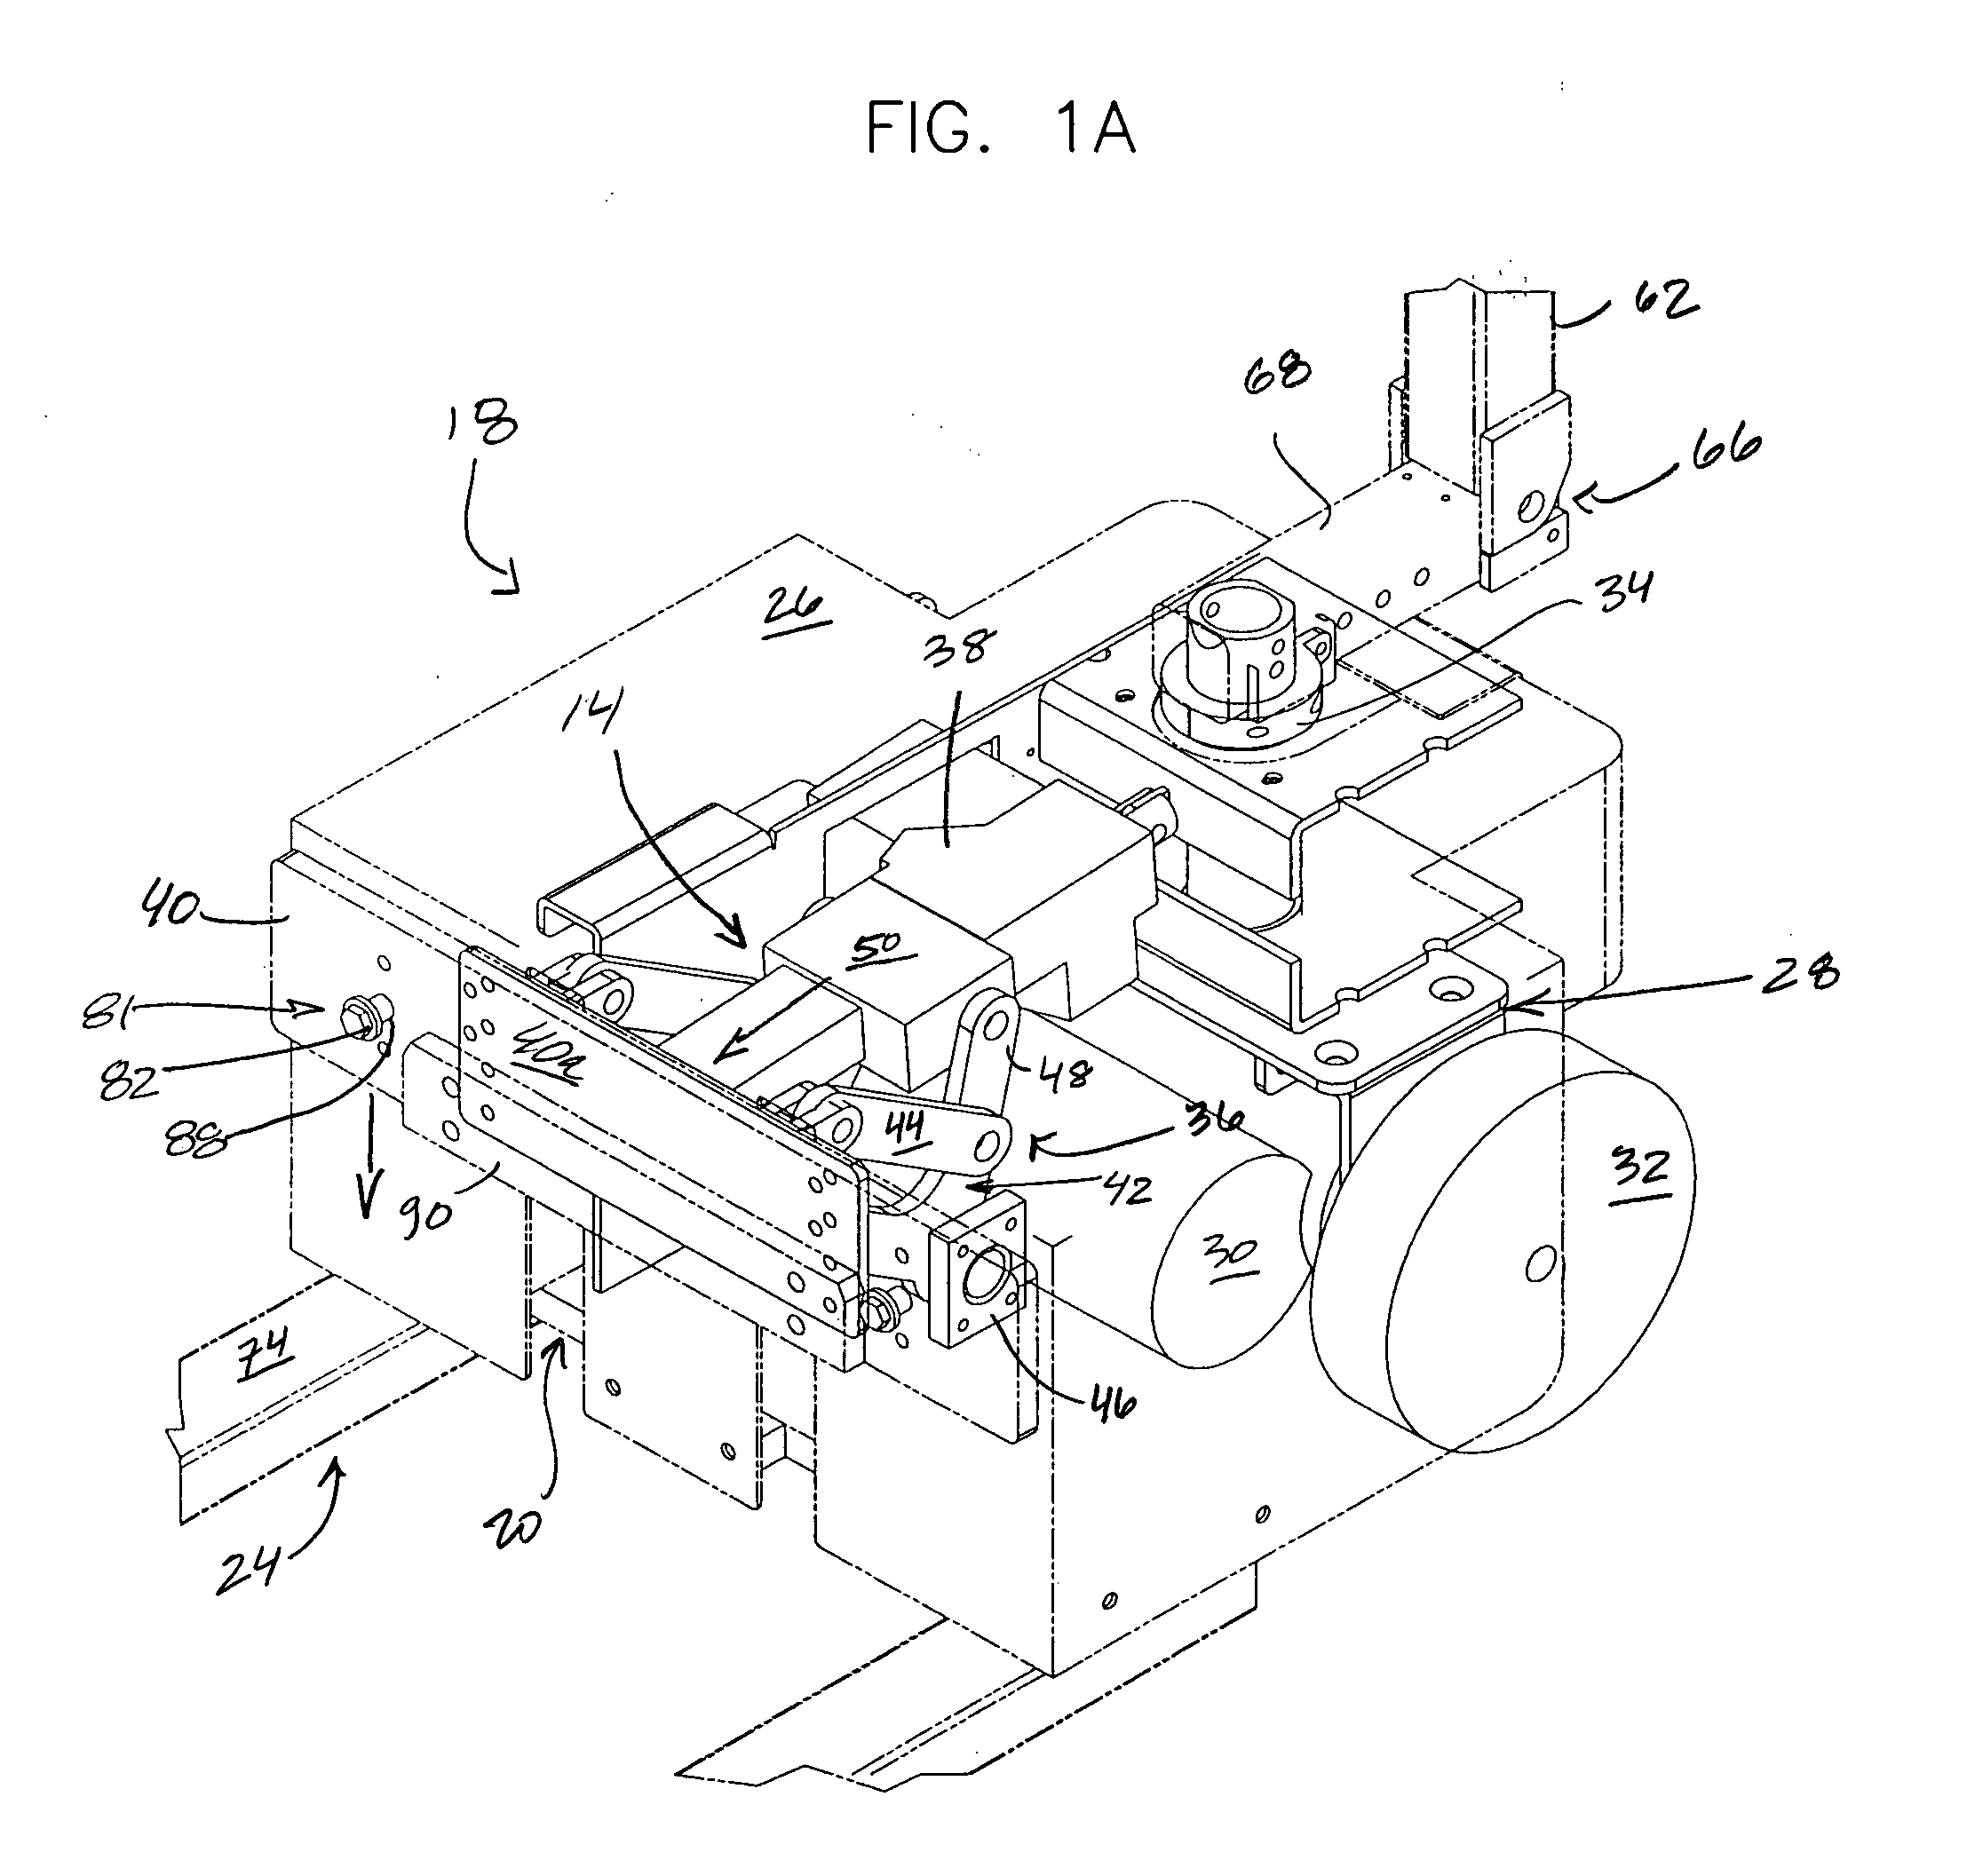 Transport aid for wheeled support apparatus